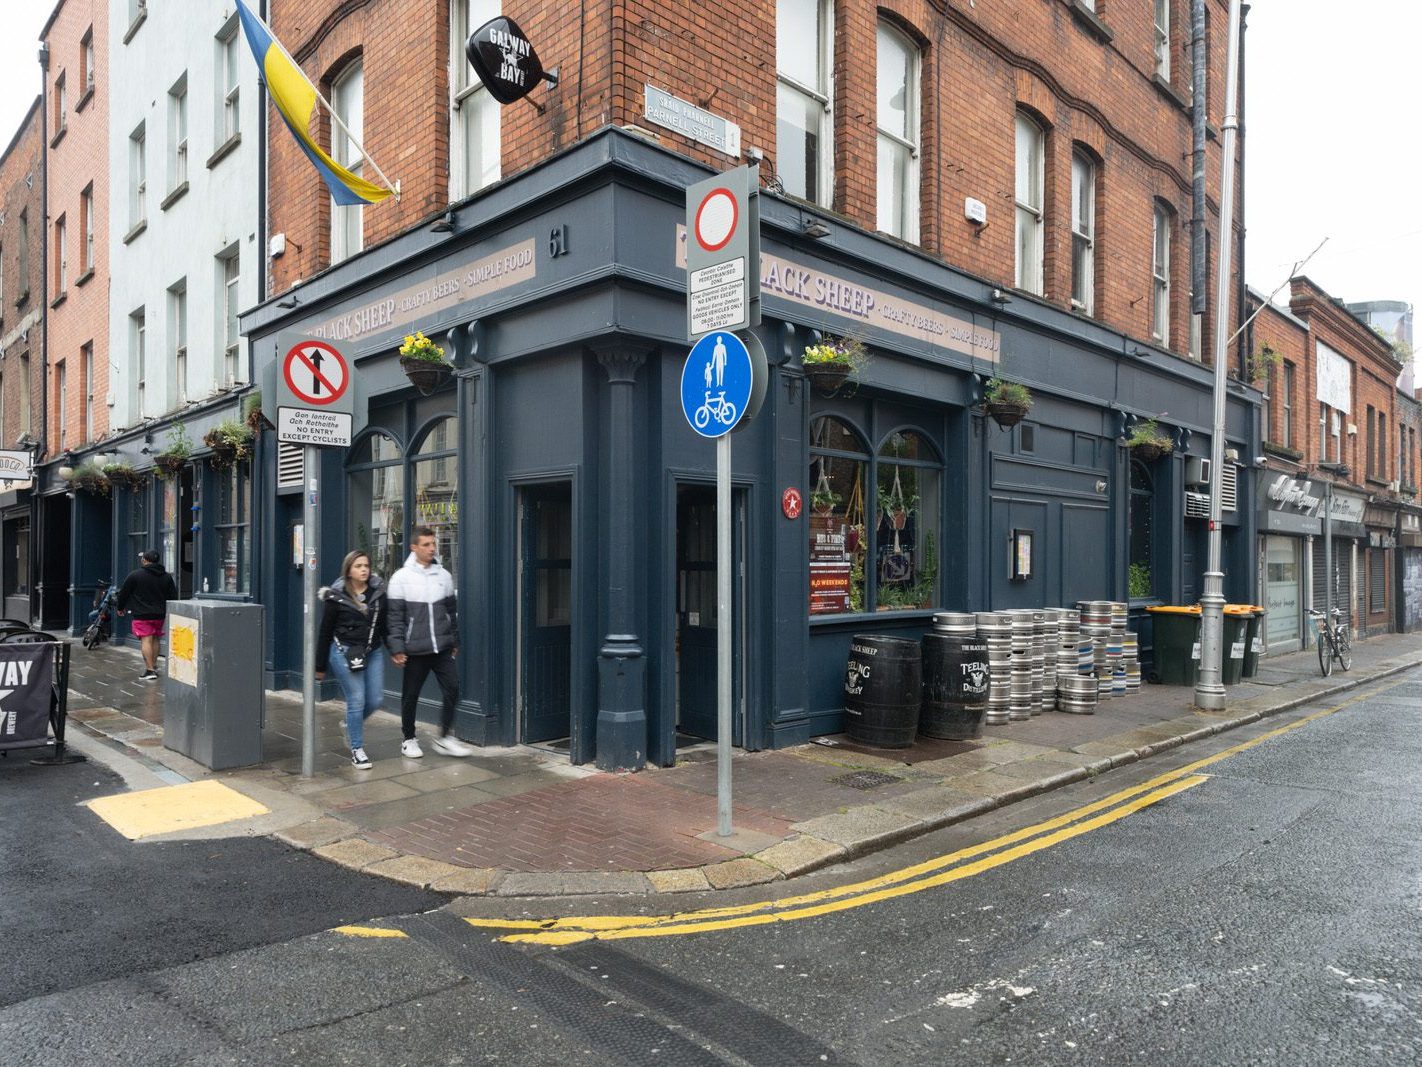 CAPEL STREET ON A DULL WET DAY [INTERIM CAPEL STREET IMPROVEMENT WORKS ARE NOW ONGOING] 033